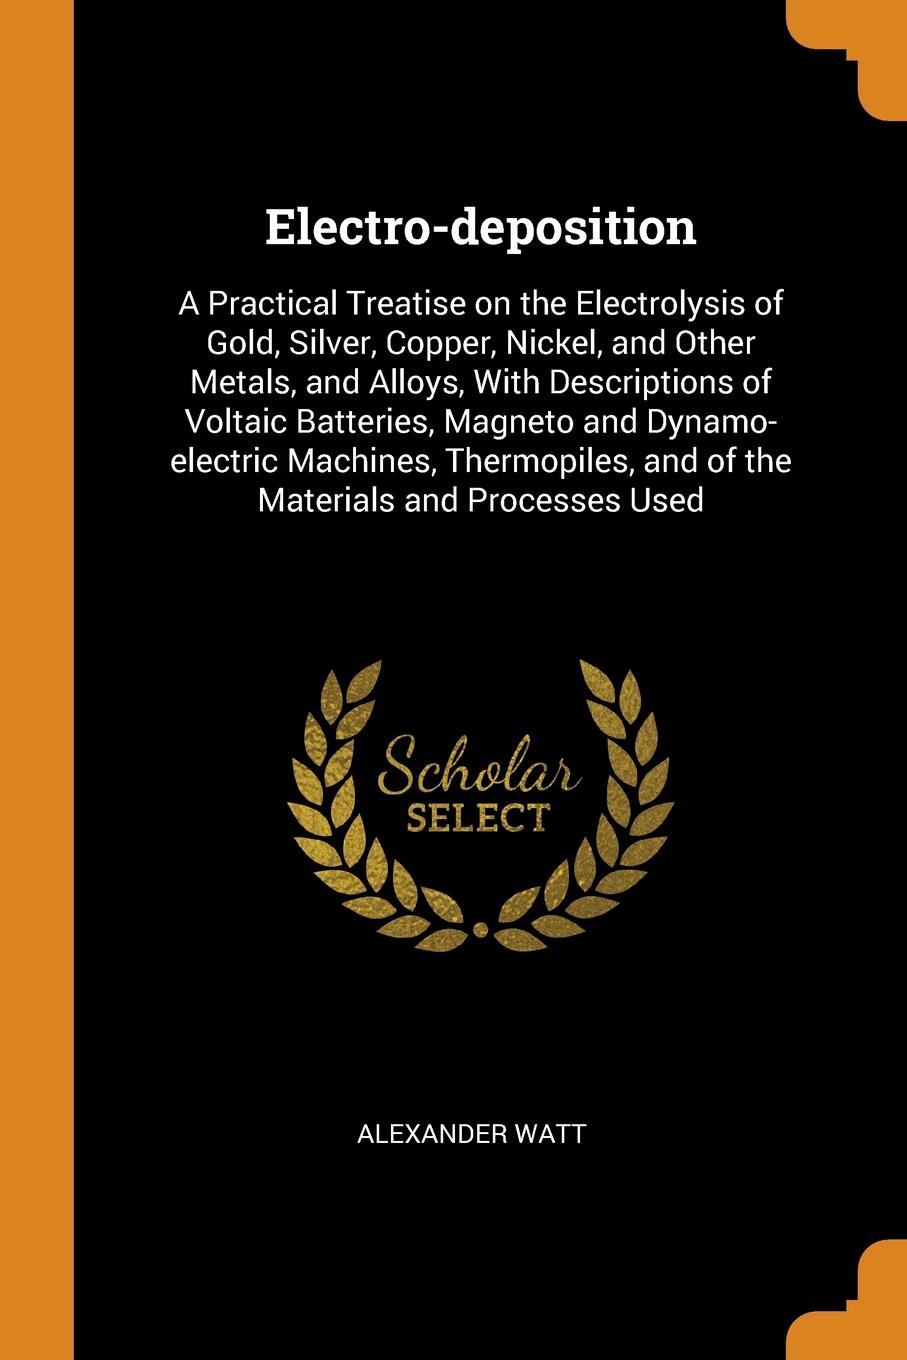 Electro-deposition. A Practical Treatise on the Electrolysis of Gold, Silver, Copper, Nickel, and Other Metals, and Alloys, With Descriptions of Voltaic Batteries, Magneto and Dynamo-electric Machines, Thermopiles, and of the Materials and Process...